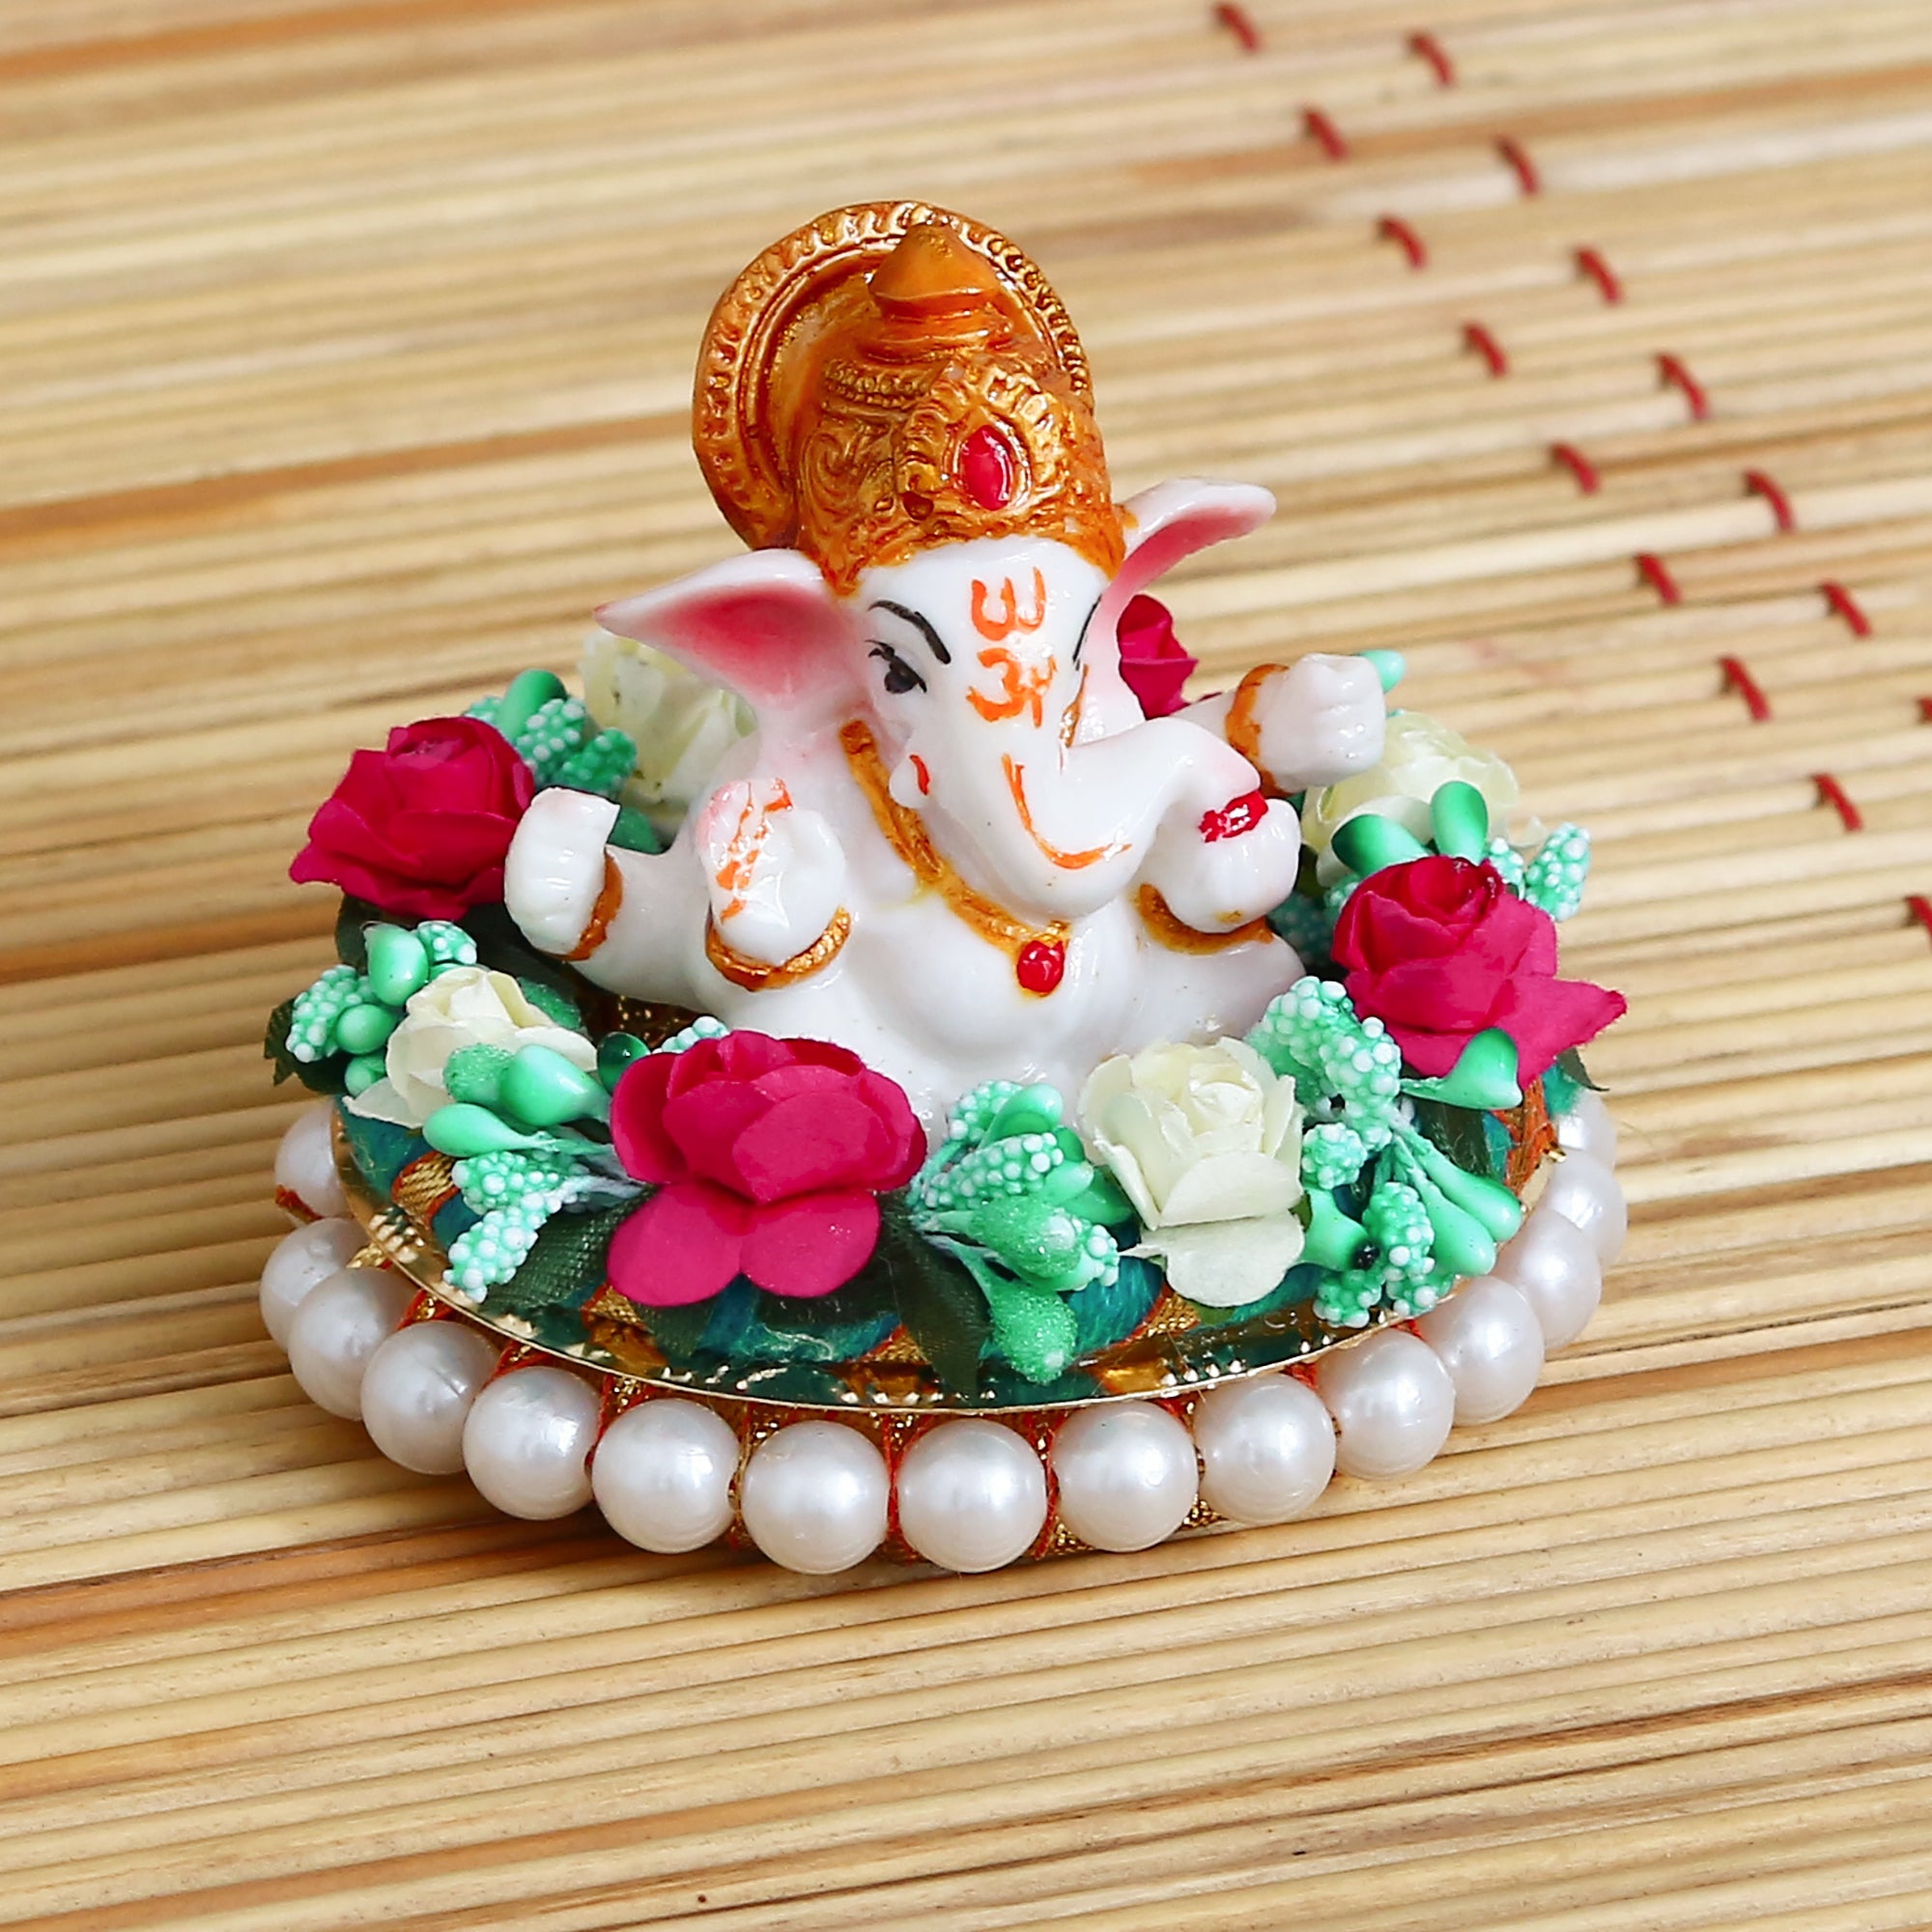 Lord Ganesha Idol on Decorative Handcrafted Plate with Colorful Flowers 1